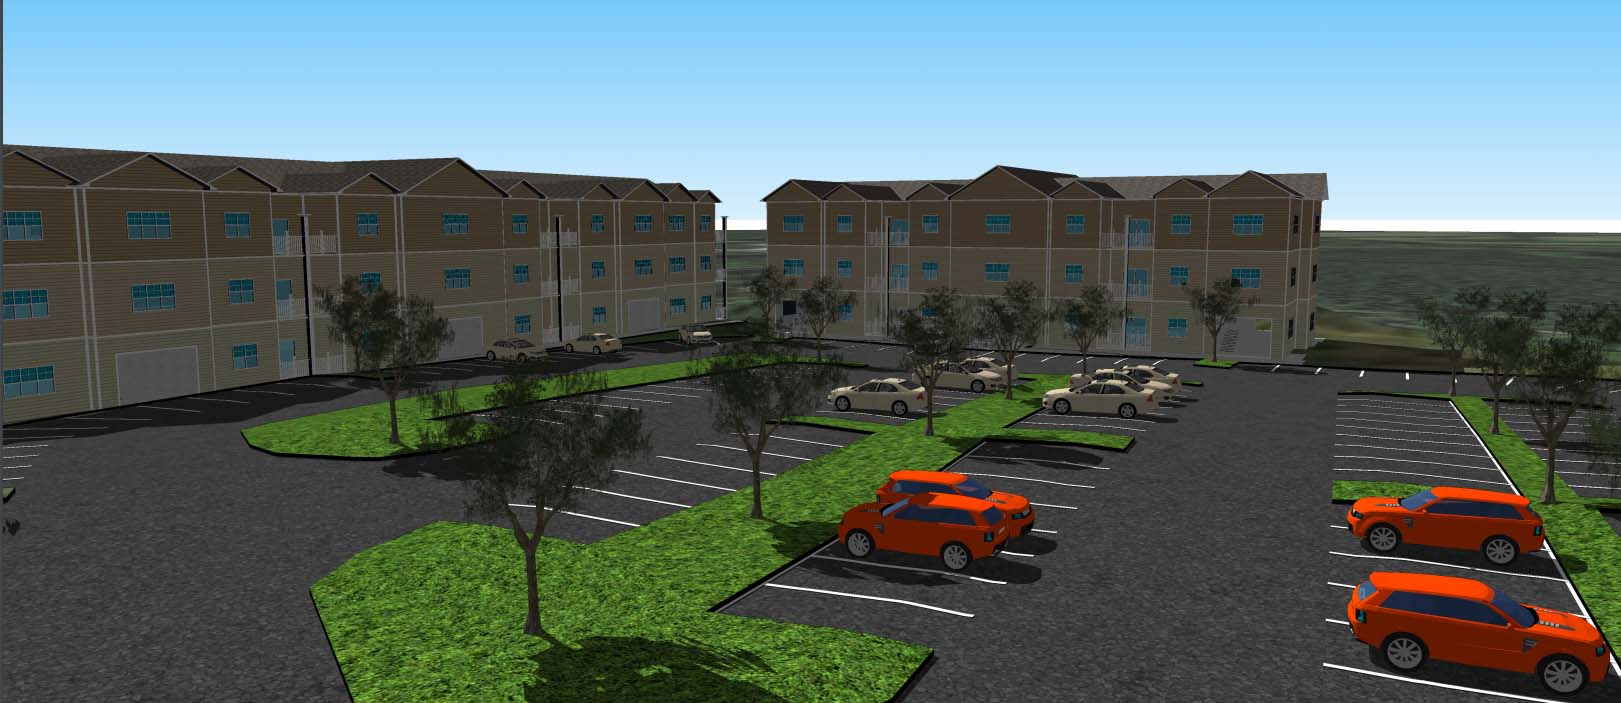 Click to enlarge - Greenwood Genetic Center Partnership Campus Multi-family